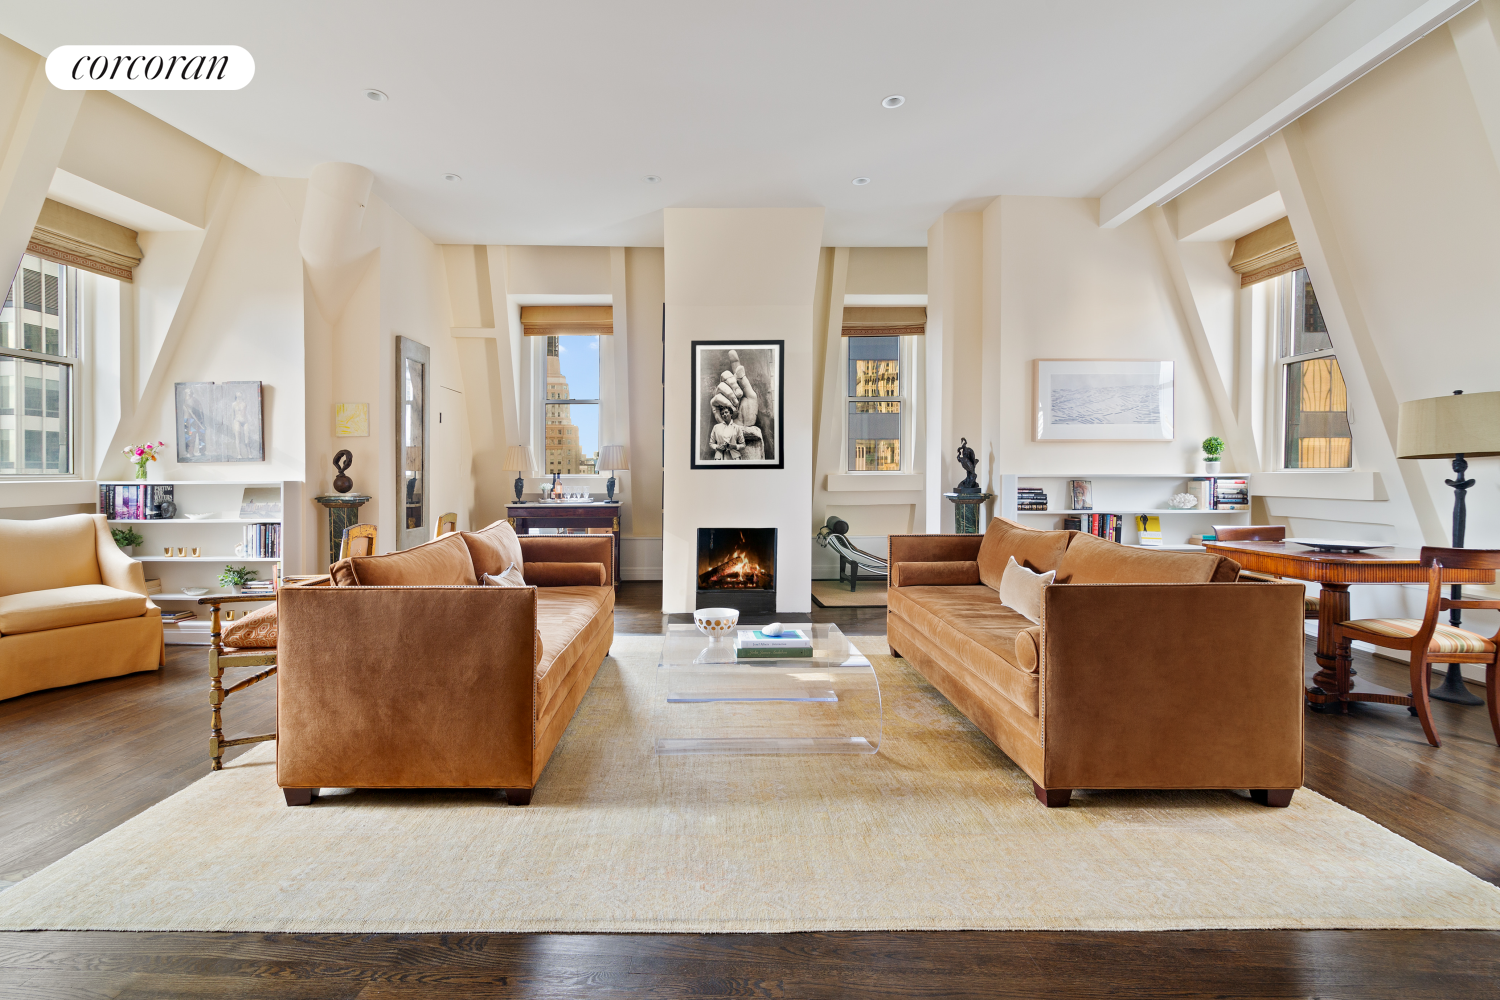 55 Liberty Street Ph32, Financial District, Downtown, NYC - 2 Bedrooms  
2 Bathrooms  
7 Rooms - 